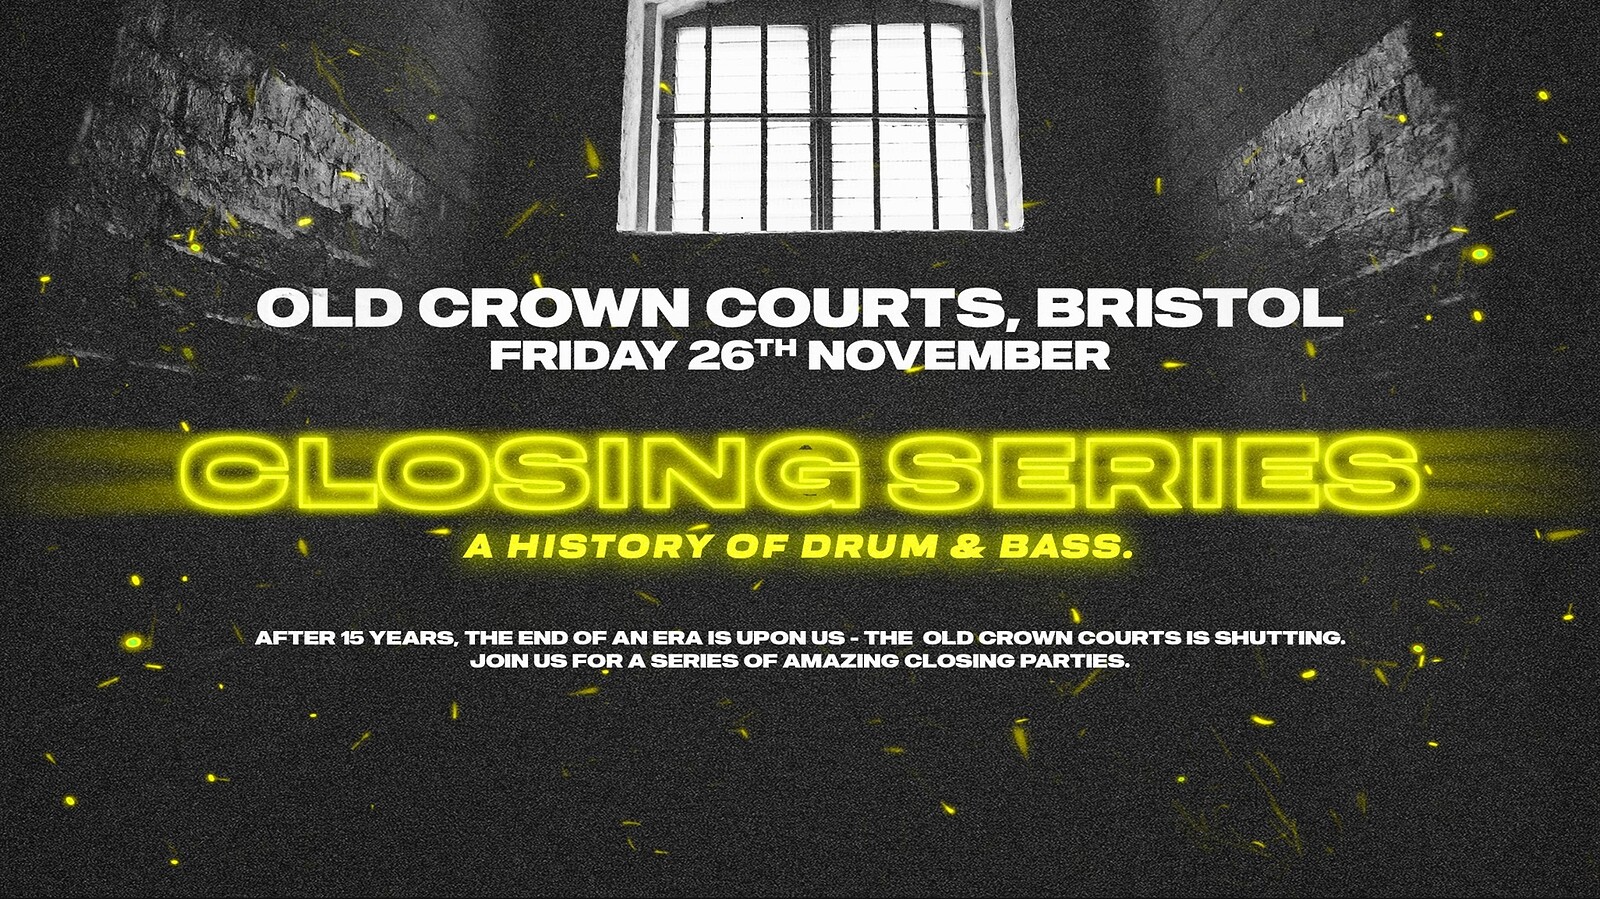 OCC Closing Rave • A History of Drum & Bass at The Old Crown Courts